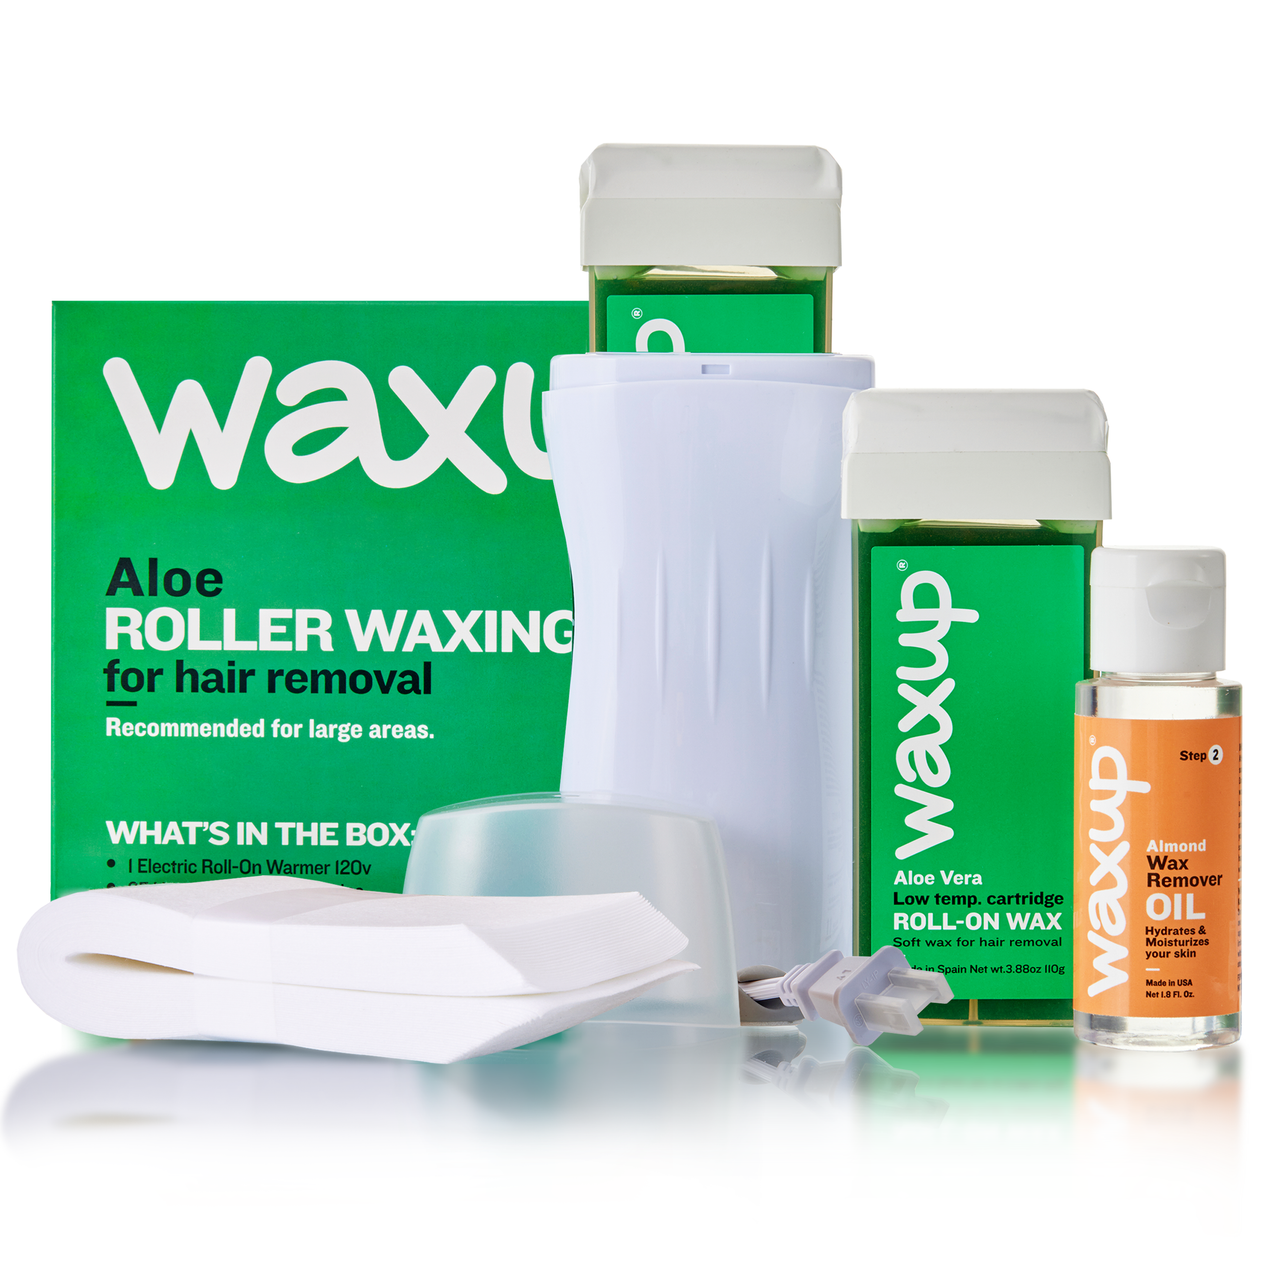 Aloe Roller Waxing Kit Buy with Prime - thatswaxup -  - Roller Waxing Kit - waxup hair removal wax body waxing kit women and men professional waxing supplies